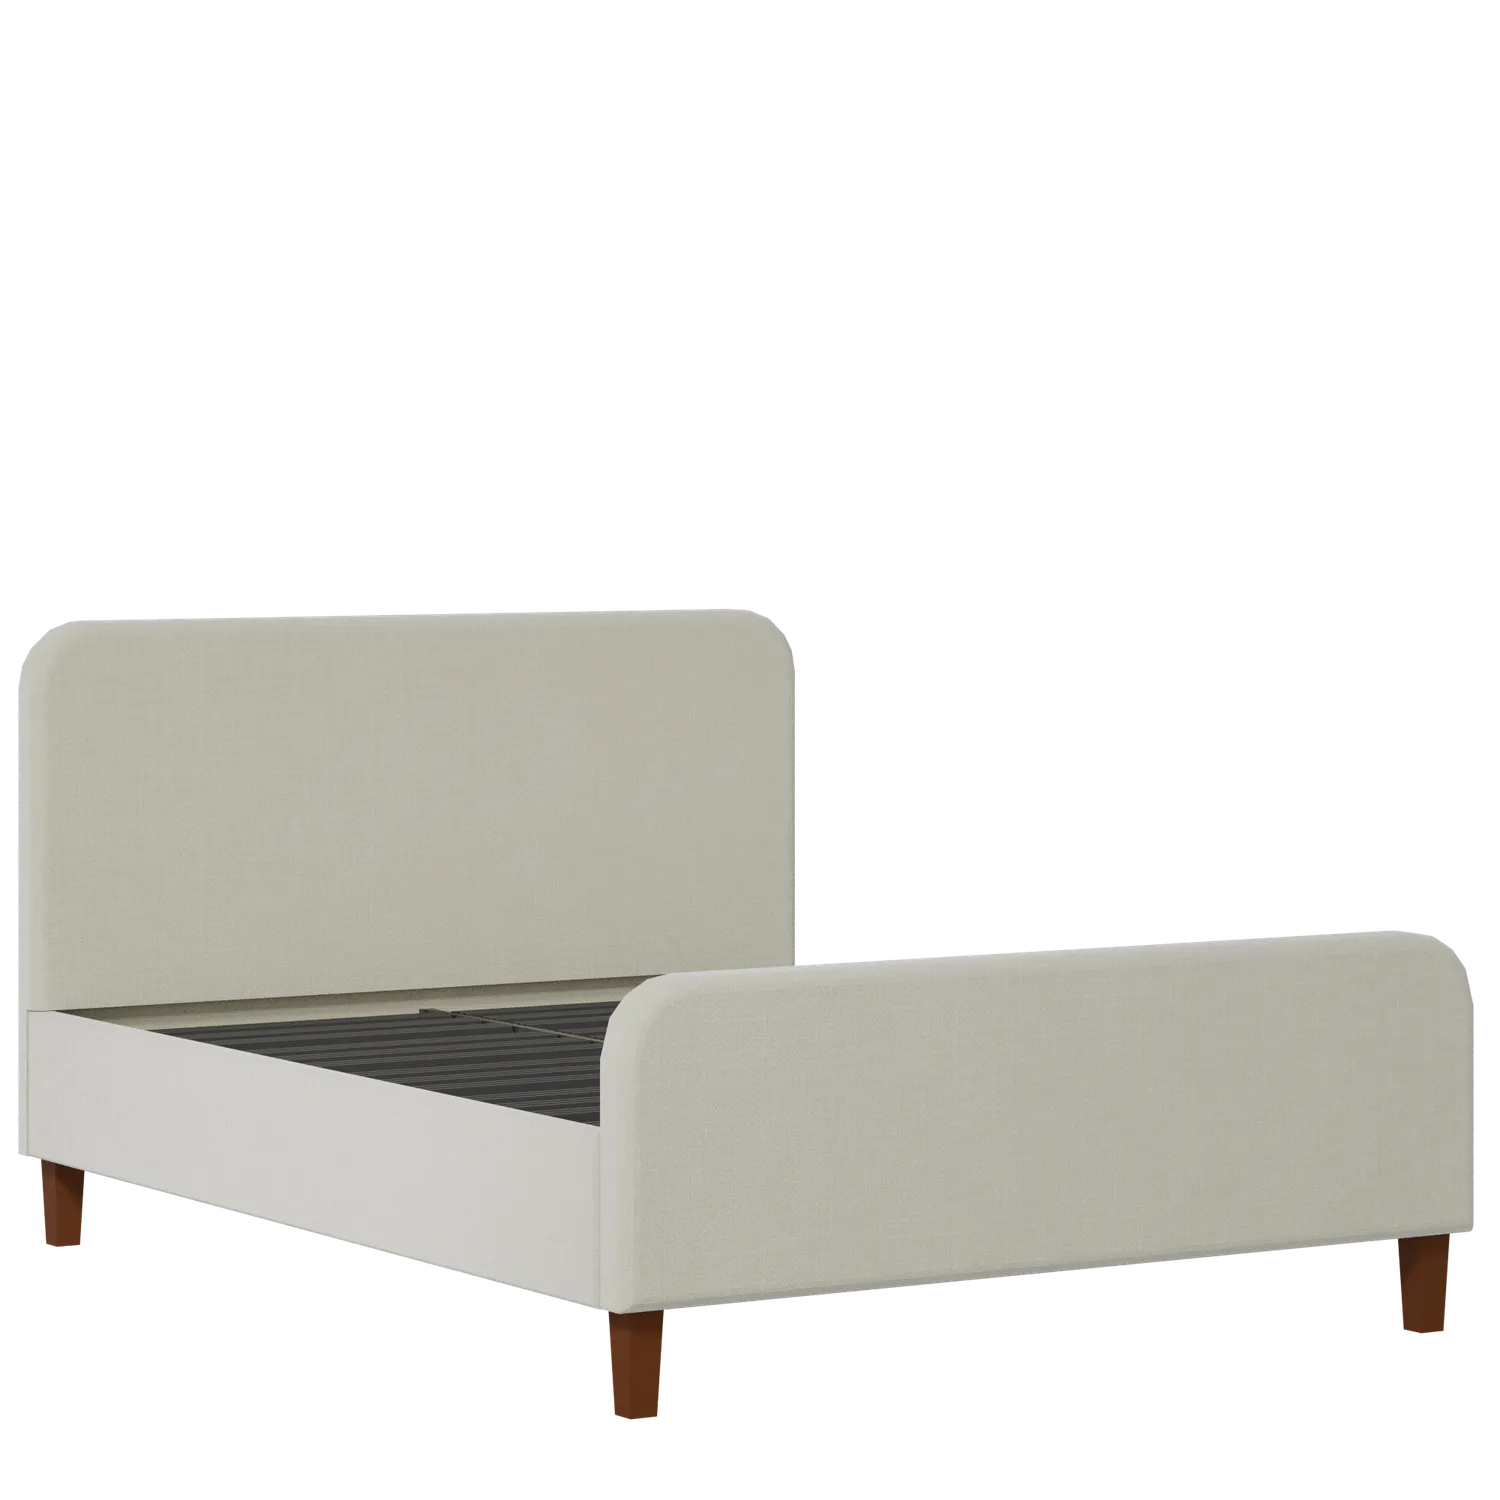 Broughton upholstered bed in oatmeal fabric